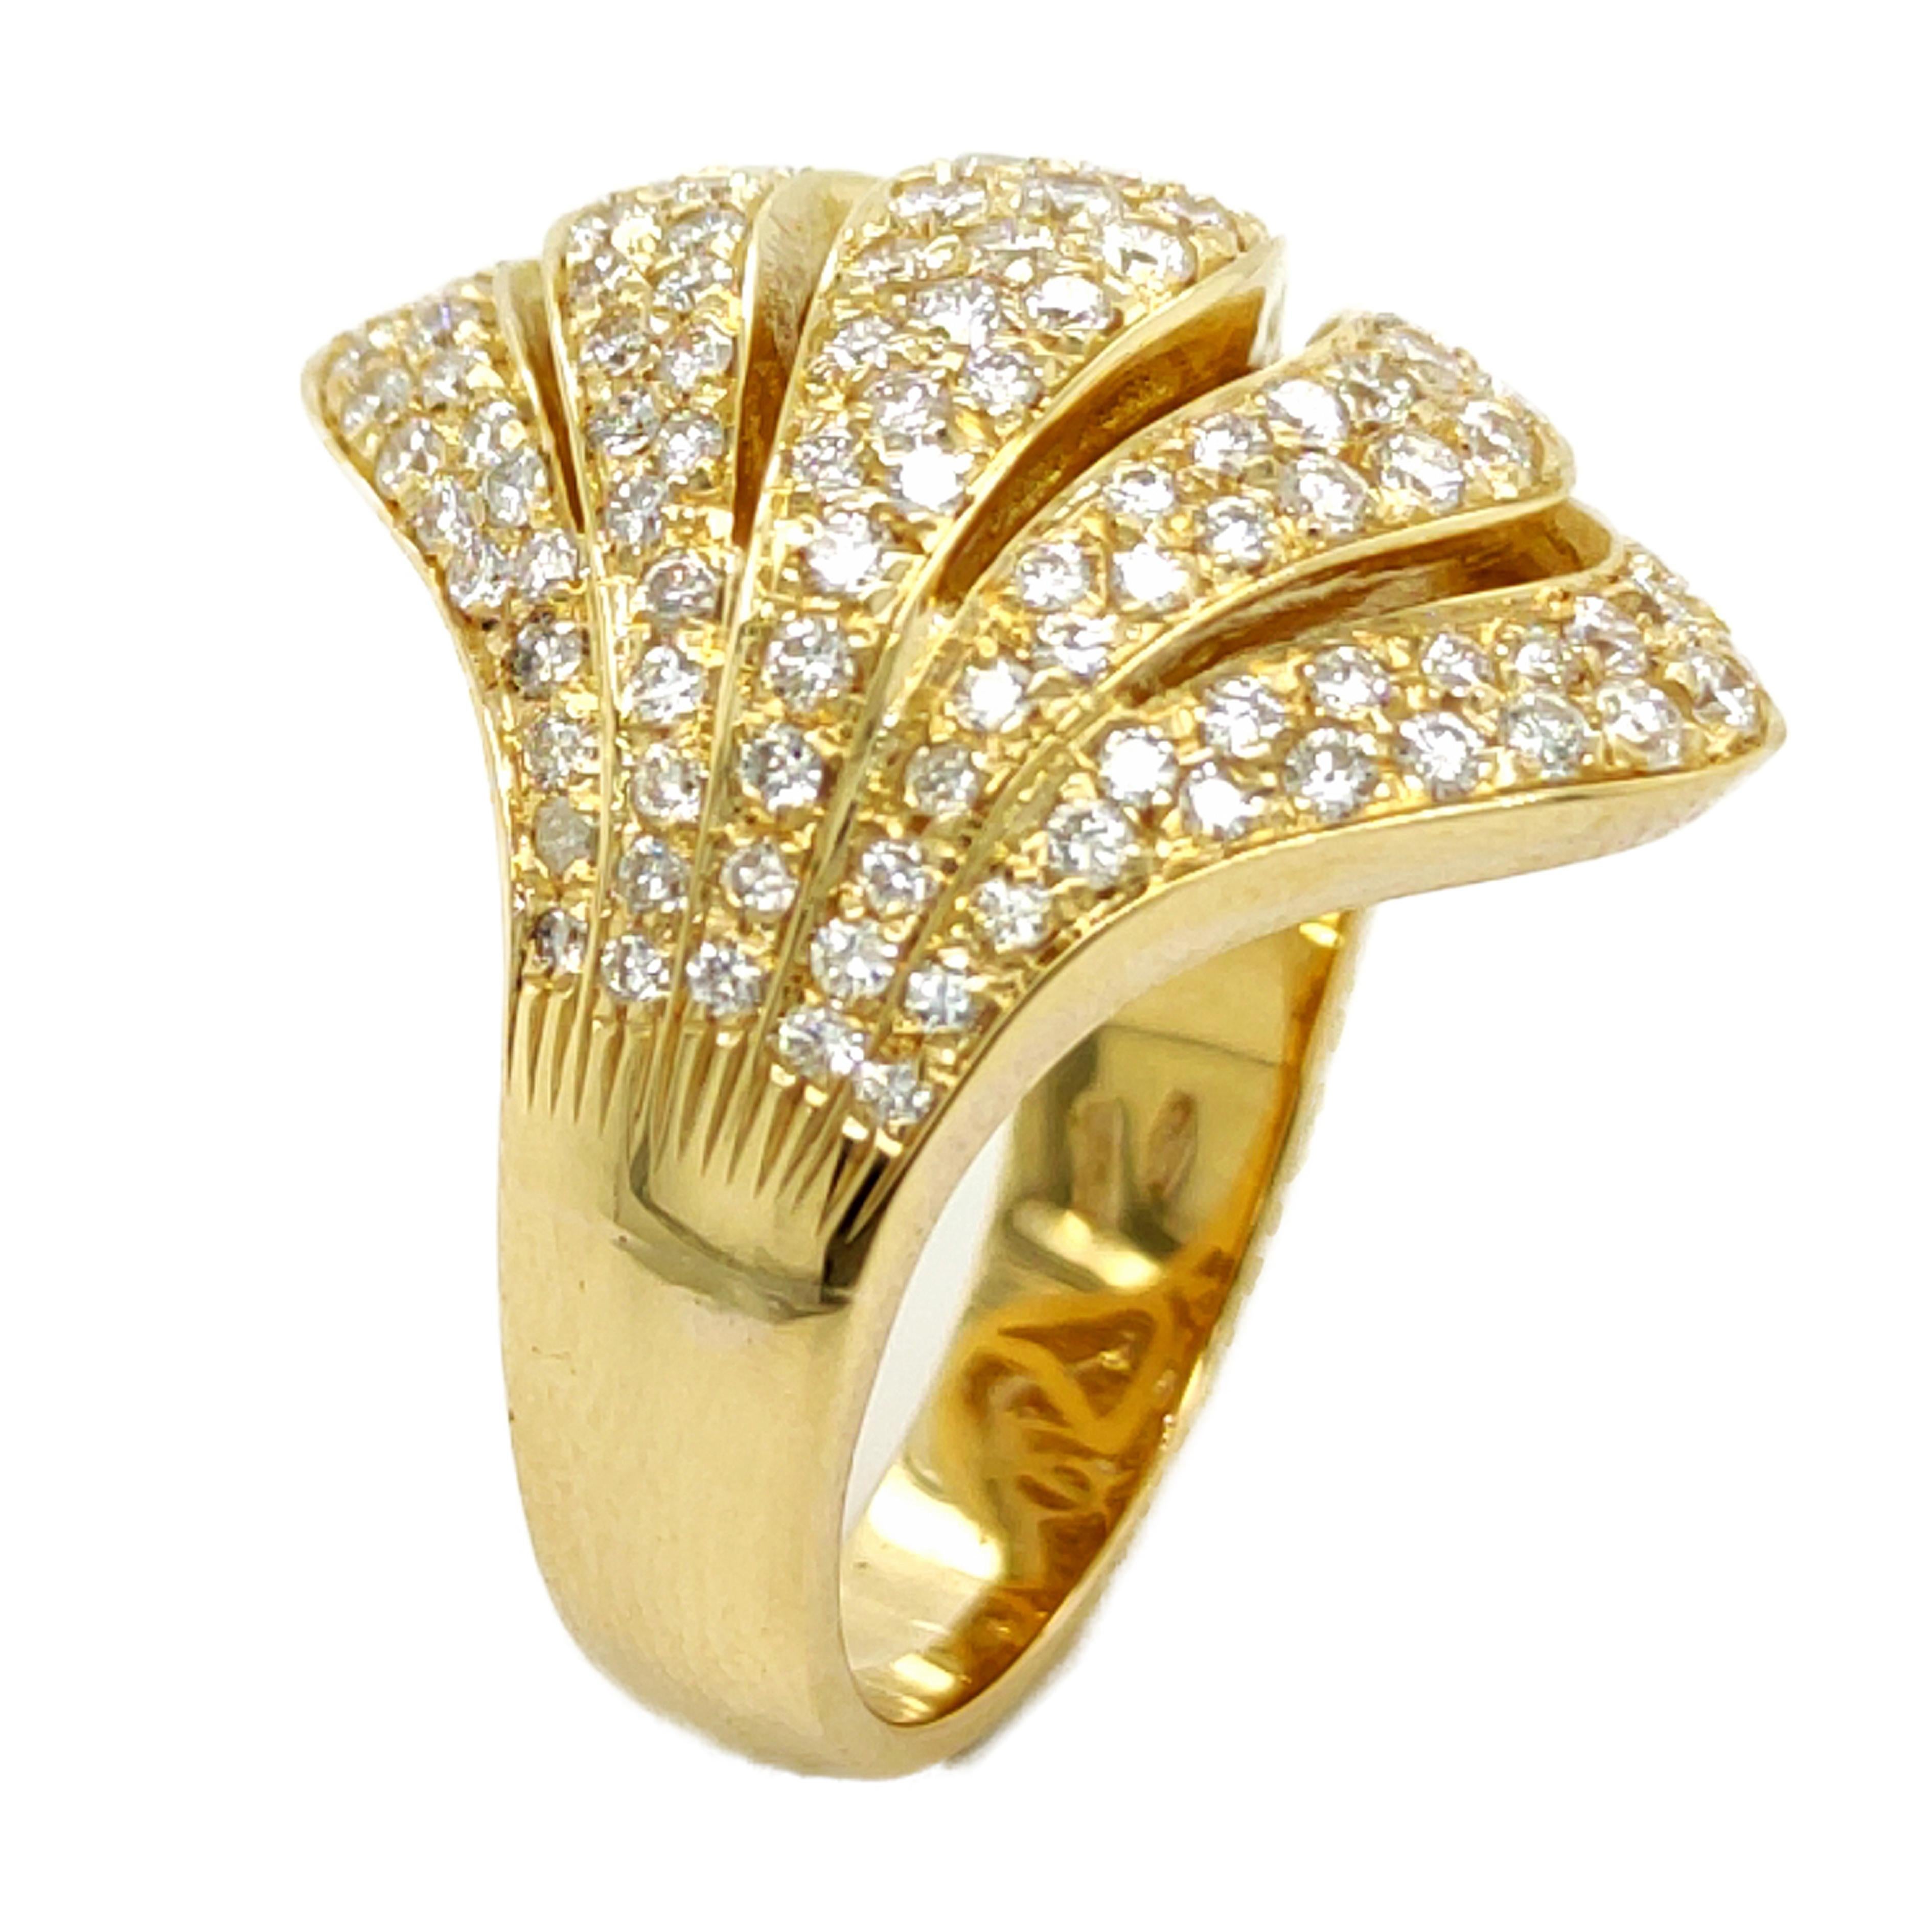 Stunning 1.87 Carat, 153 Top Quality(D-E, VVs1) White Diamond 1980's Yellow Gold Setting Cocktail Ring: this piece Hand crafted in our Atelier beginning 1980's has a strong design that stands up to some of the biggest jewelry names, Van Cleef &